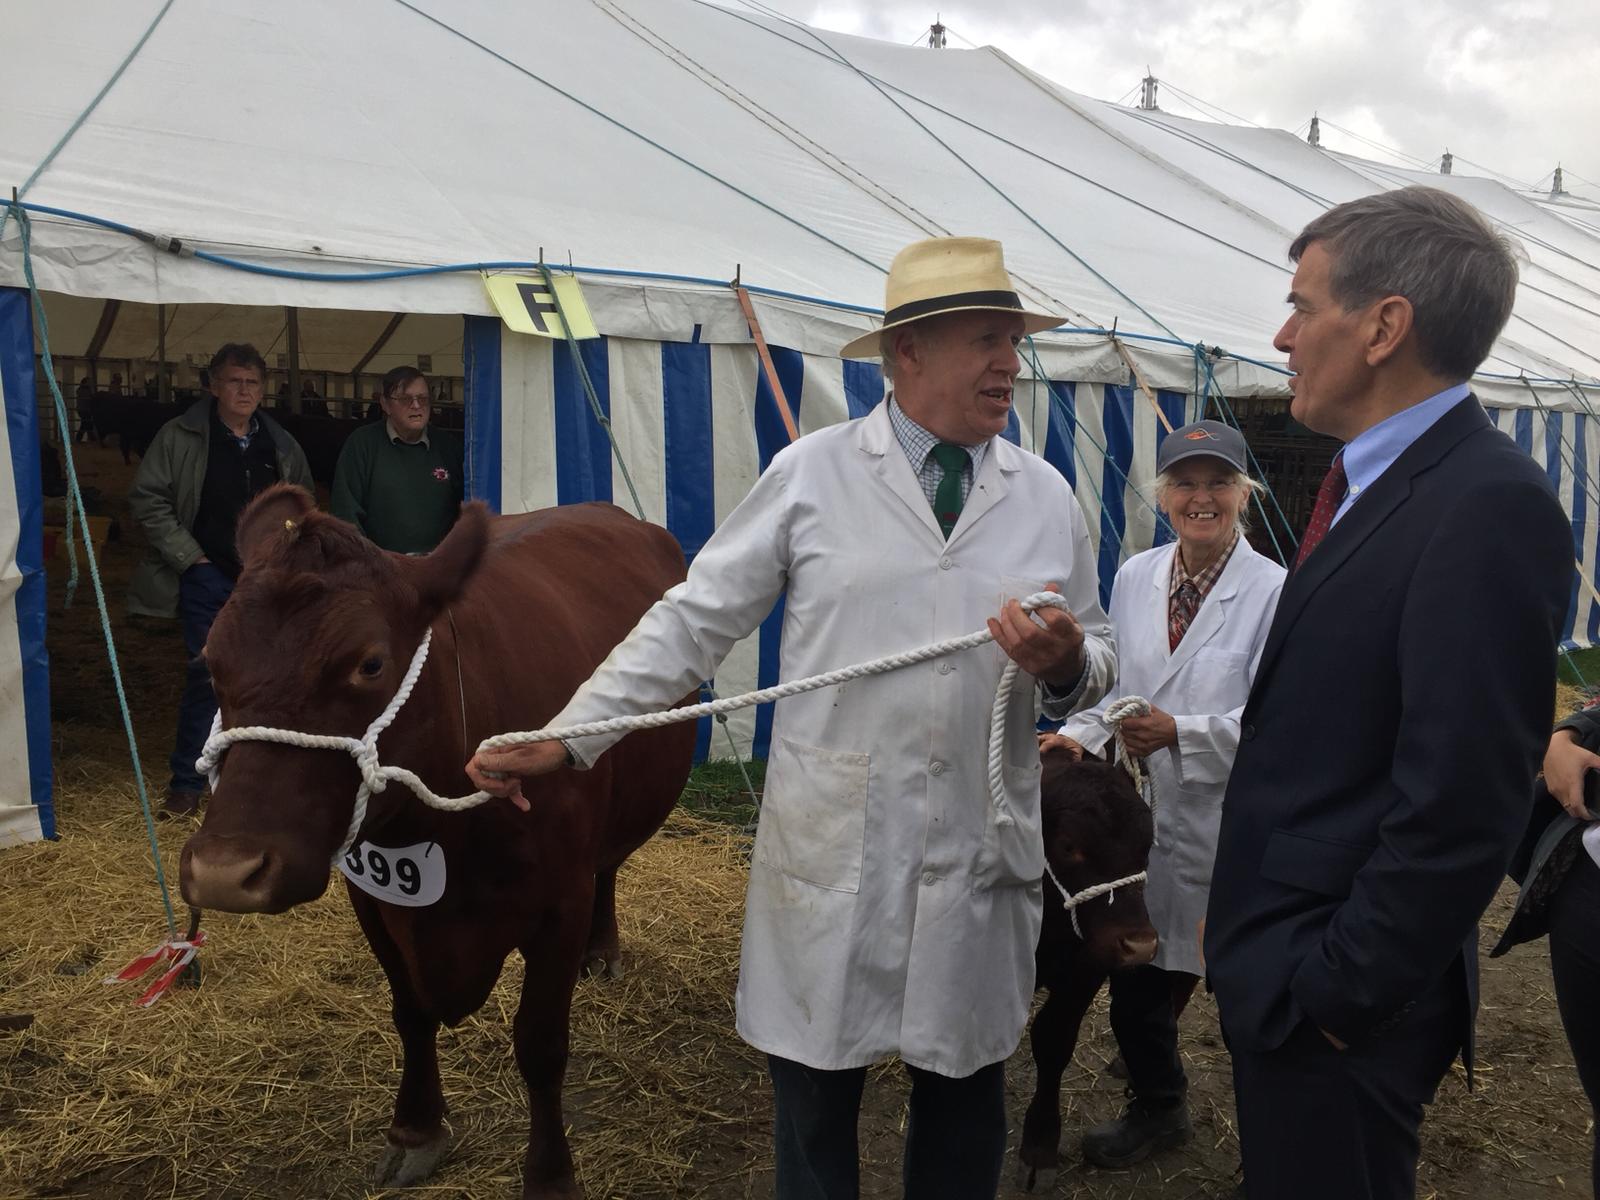 An image of Defra Minister David Rutley talking to farmers. The farmer is standing next to a cow.